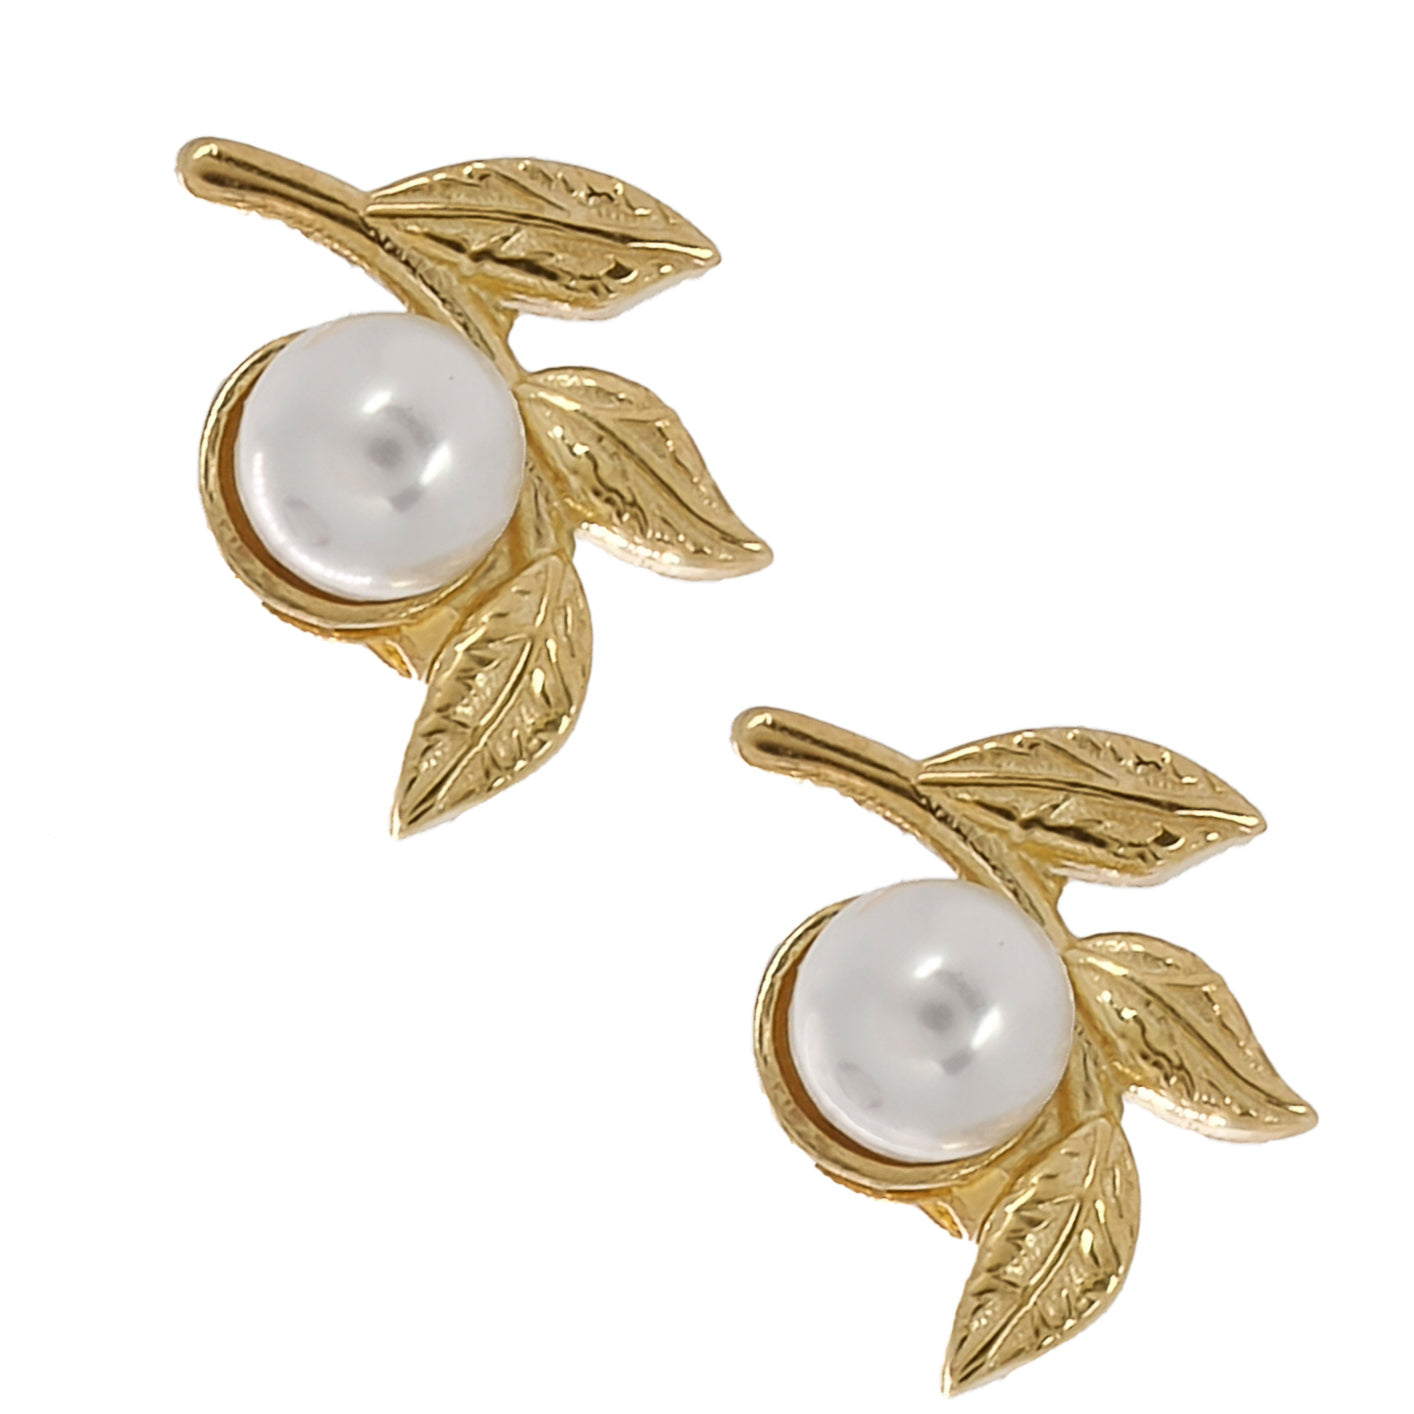 Captivating Elegance: Floral Pearl Earrings, USA Crafted, 18K Gold.